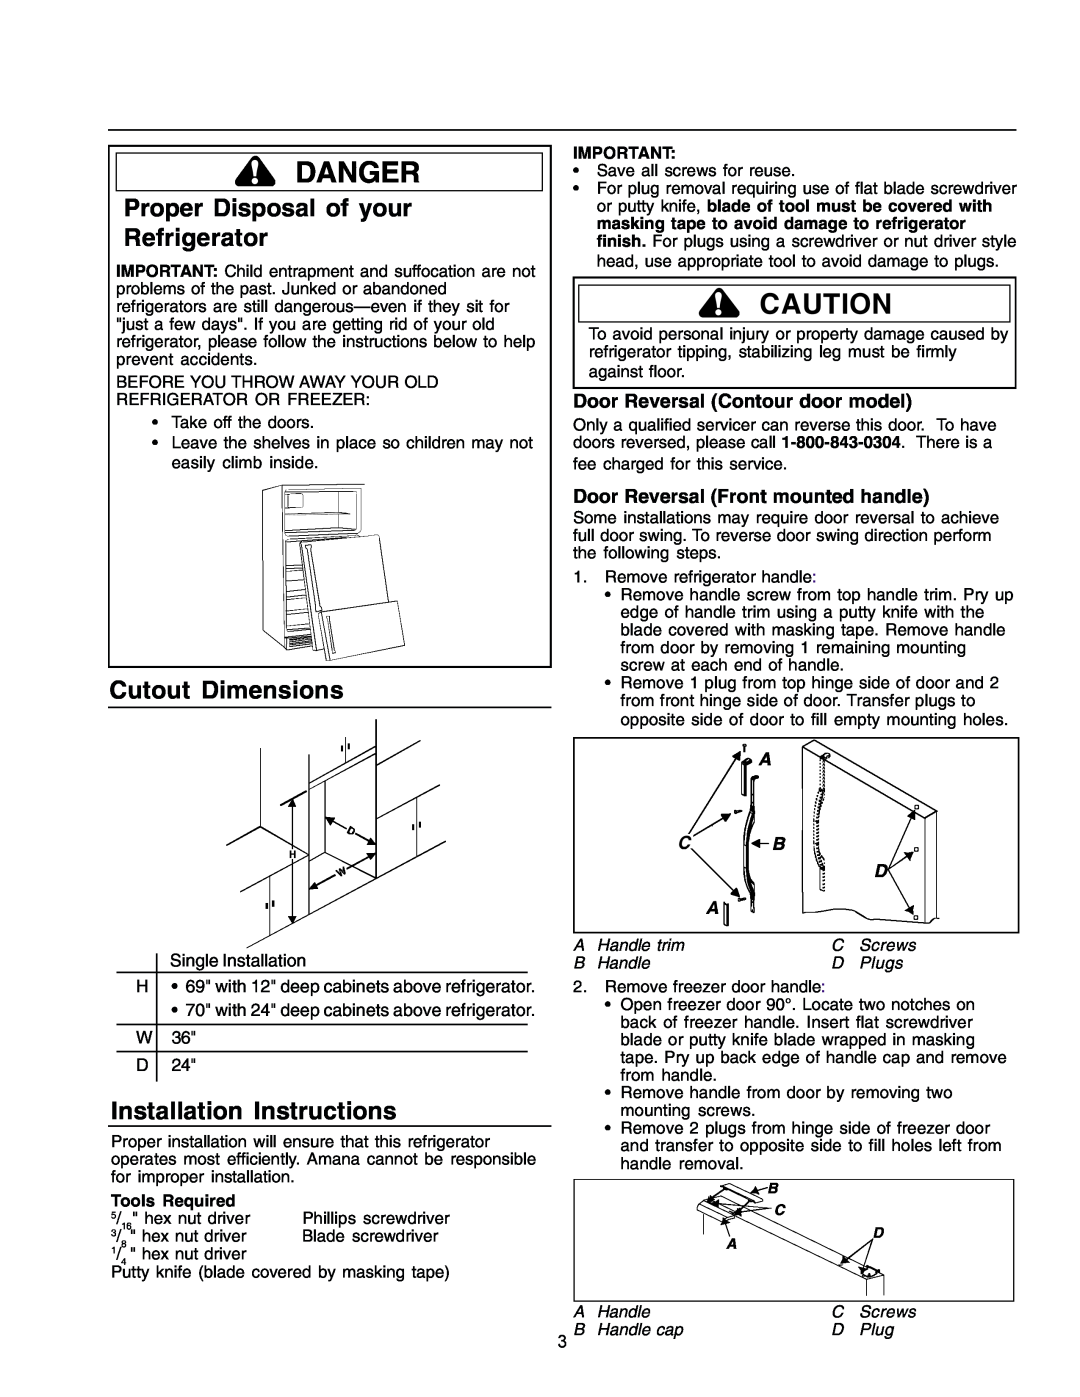 Amana IA 52204-0001 owner manual Danger, Proper Disposal of your Refrigerator, Cutout Dimensions, Installation Instructions 